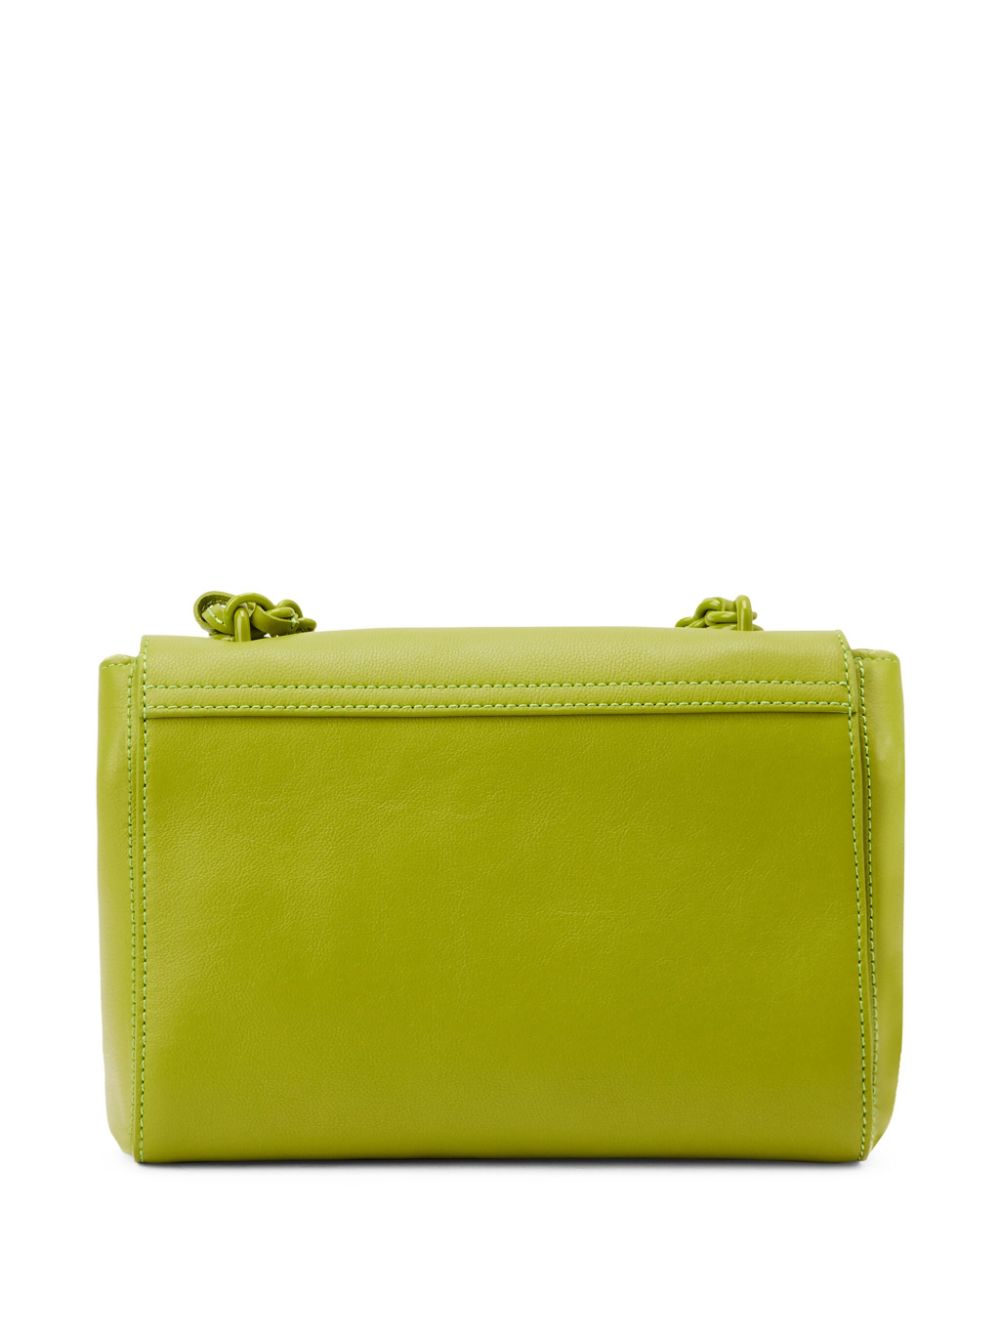 Mulberry Lily leather shoulder bag - Groen